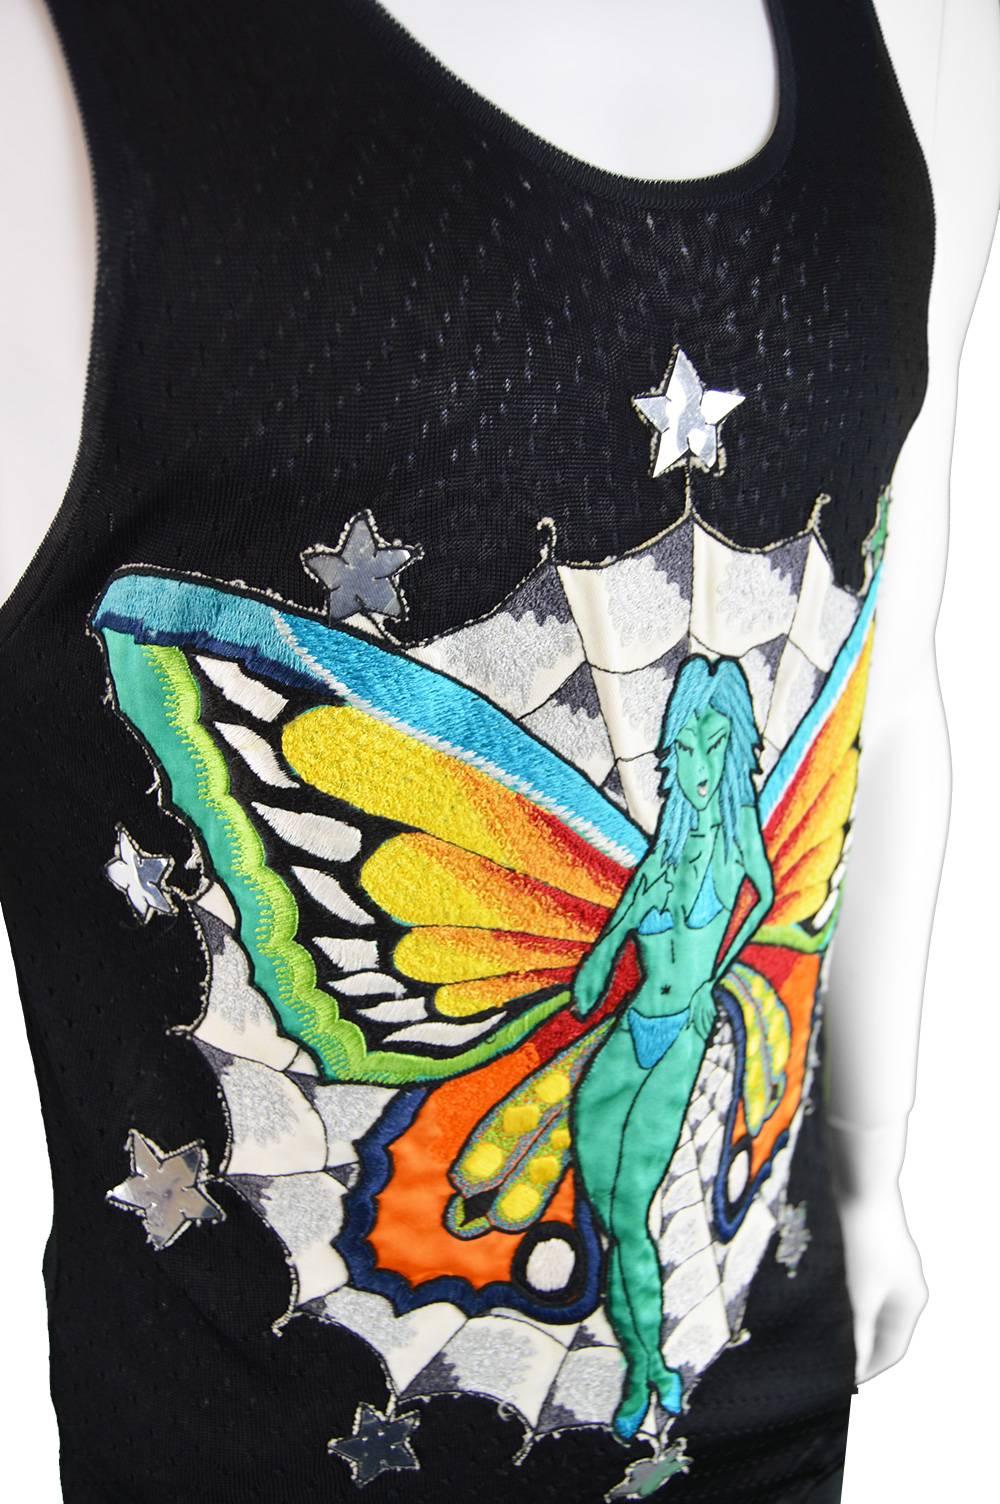 Tom Ford for Gucci Mens Rayon Knit Tank Top with Embroidered Fairy, S/S 2002  For Sale 1